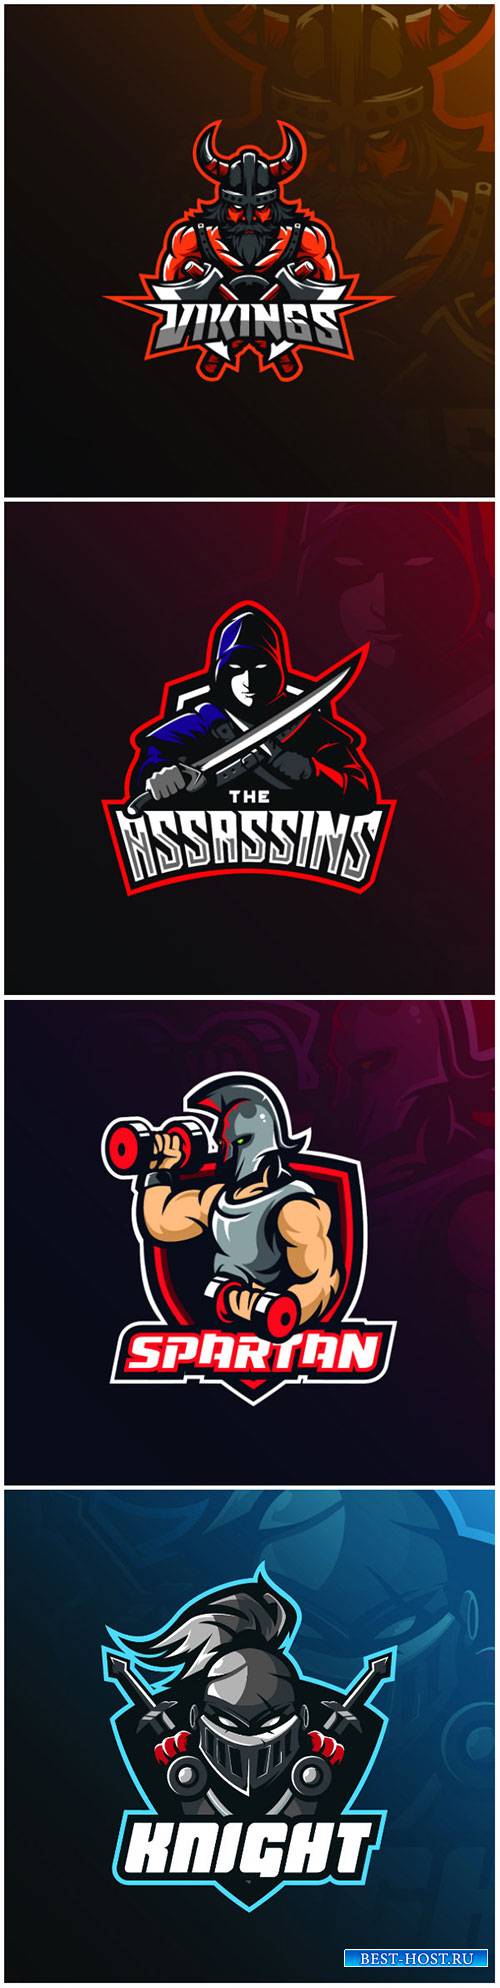 Mascot vector logo design with modern illustration concept style for badge, emblem and tshirt printing # 4